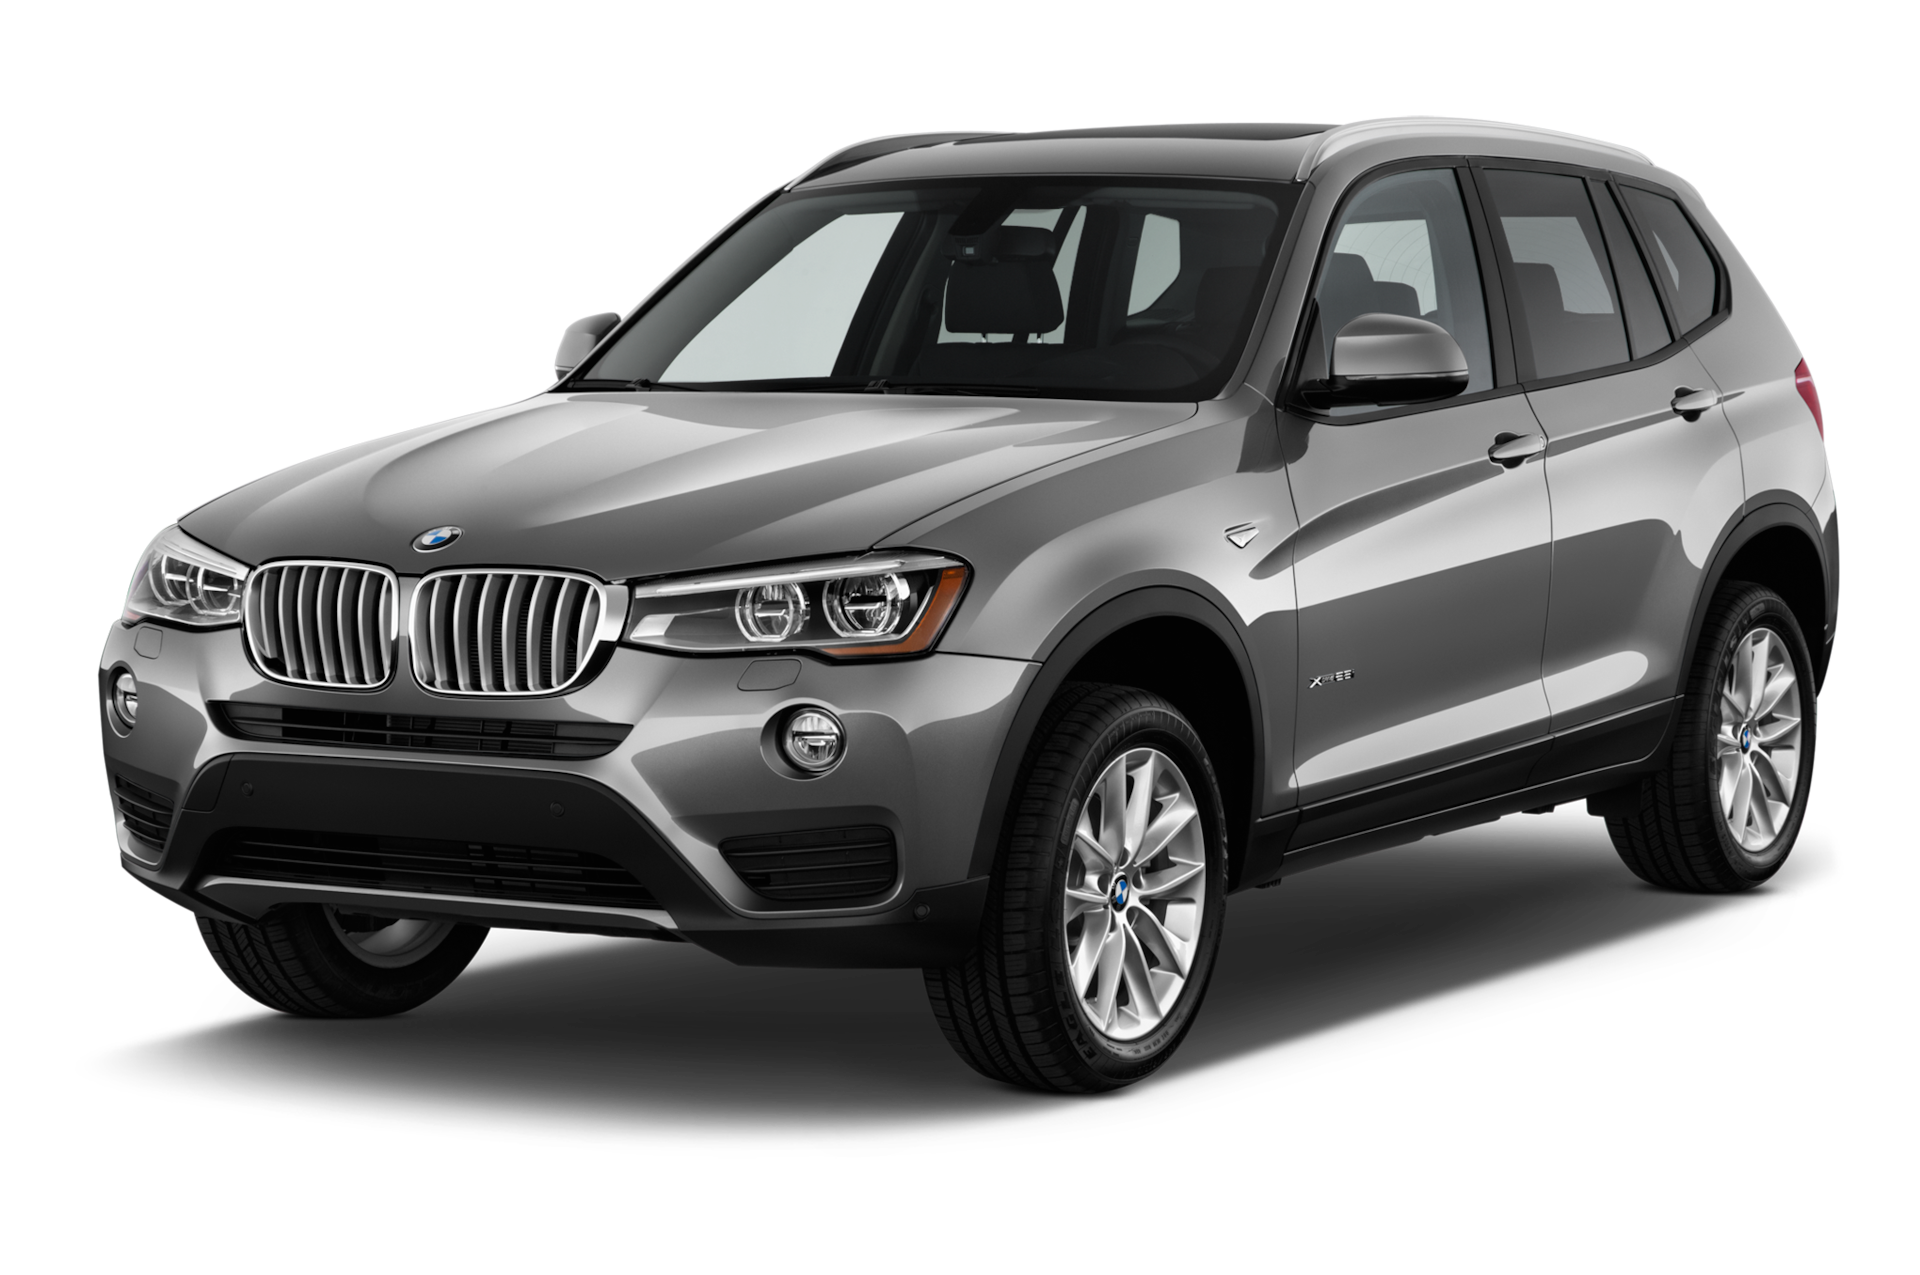 2015 BMW X3 Prices, Reviews, and Photos - MotorTrend